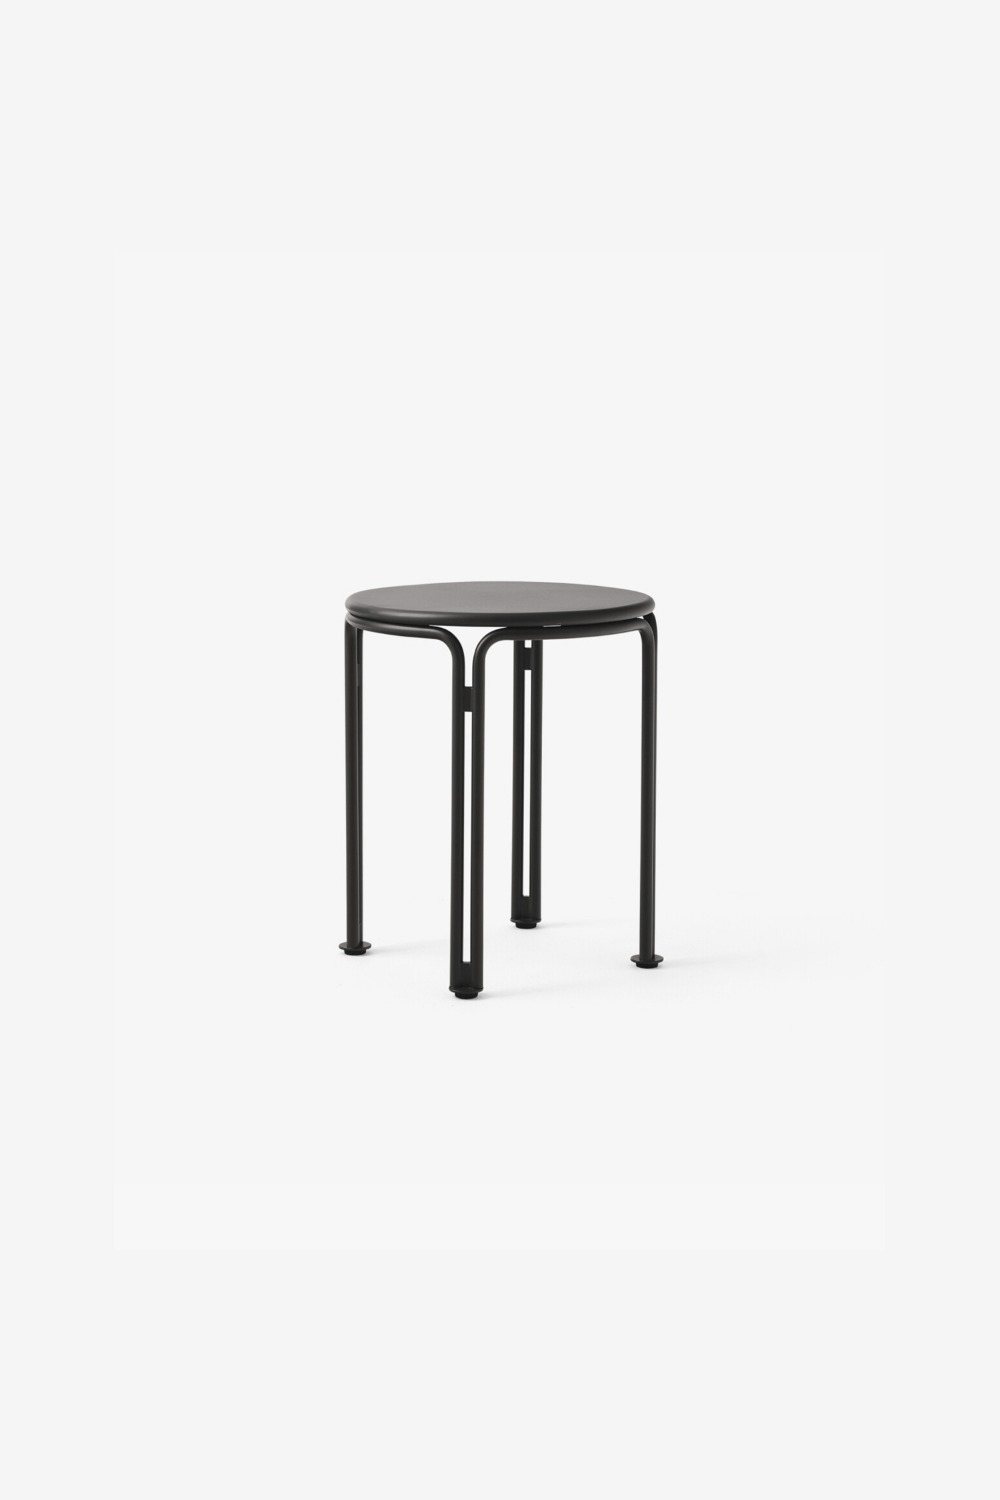 [&amp;Tradition] Thorvald Side Table /SC102 (Warm Black)